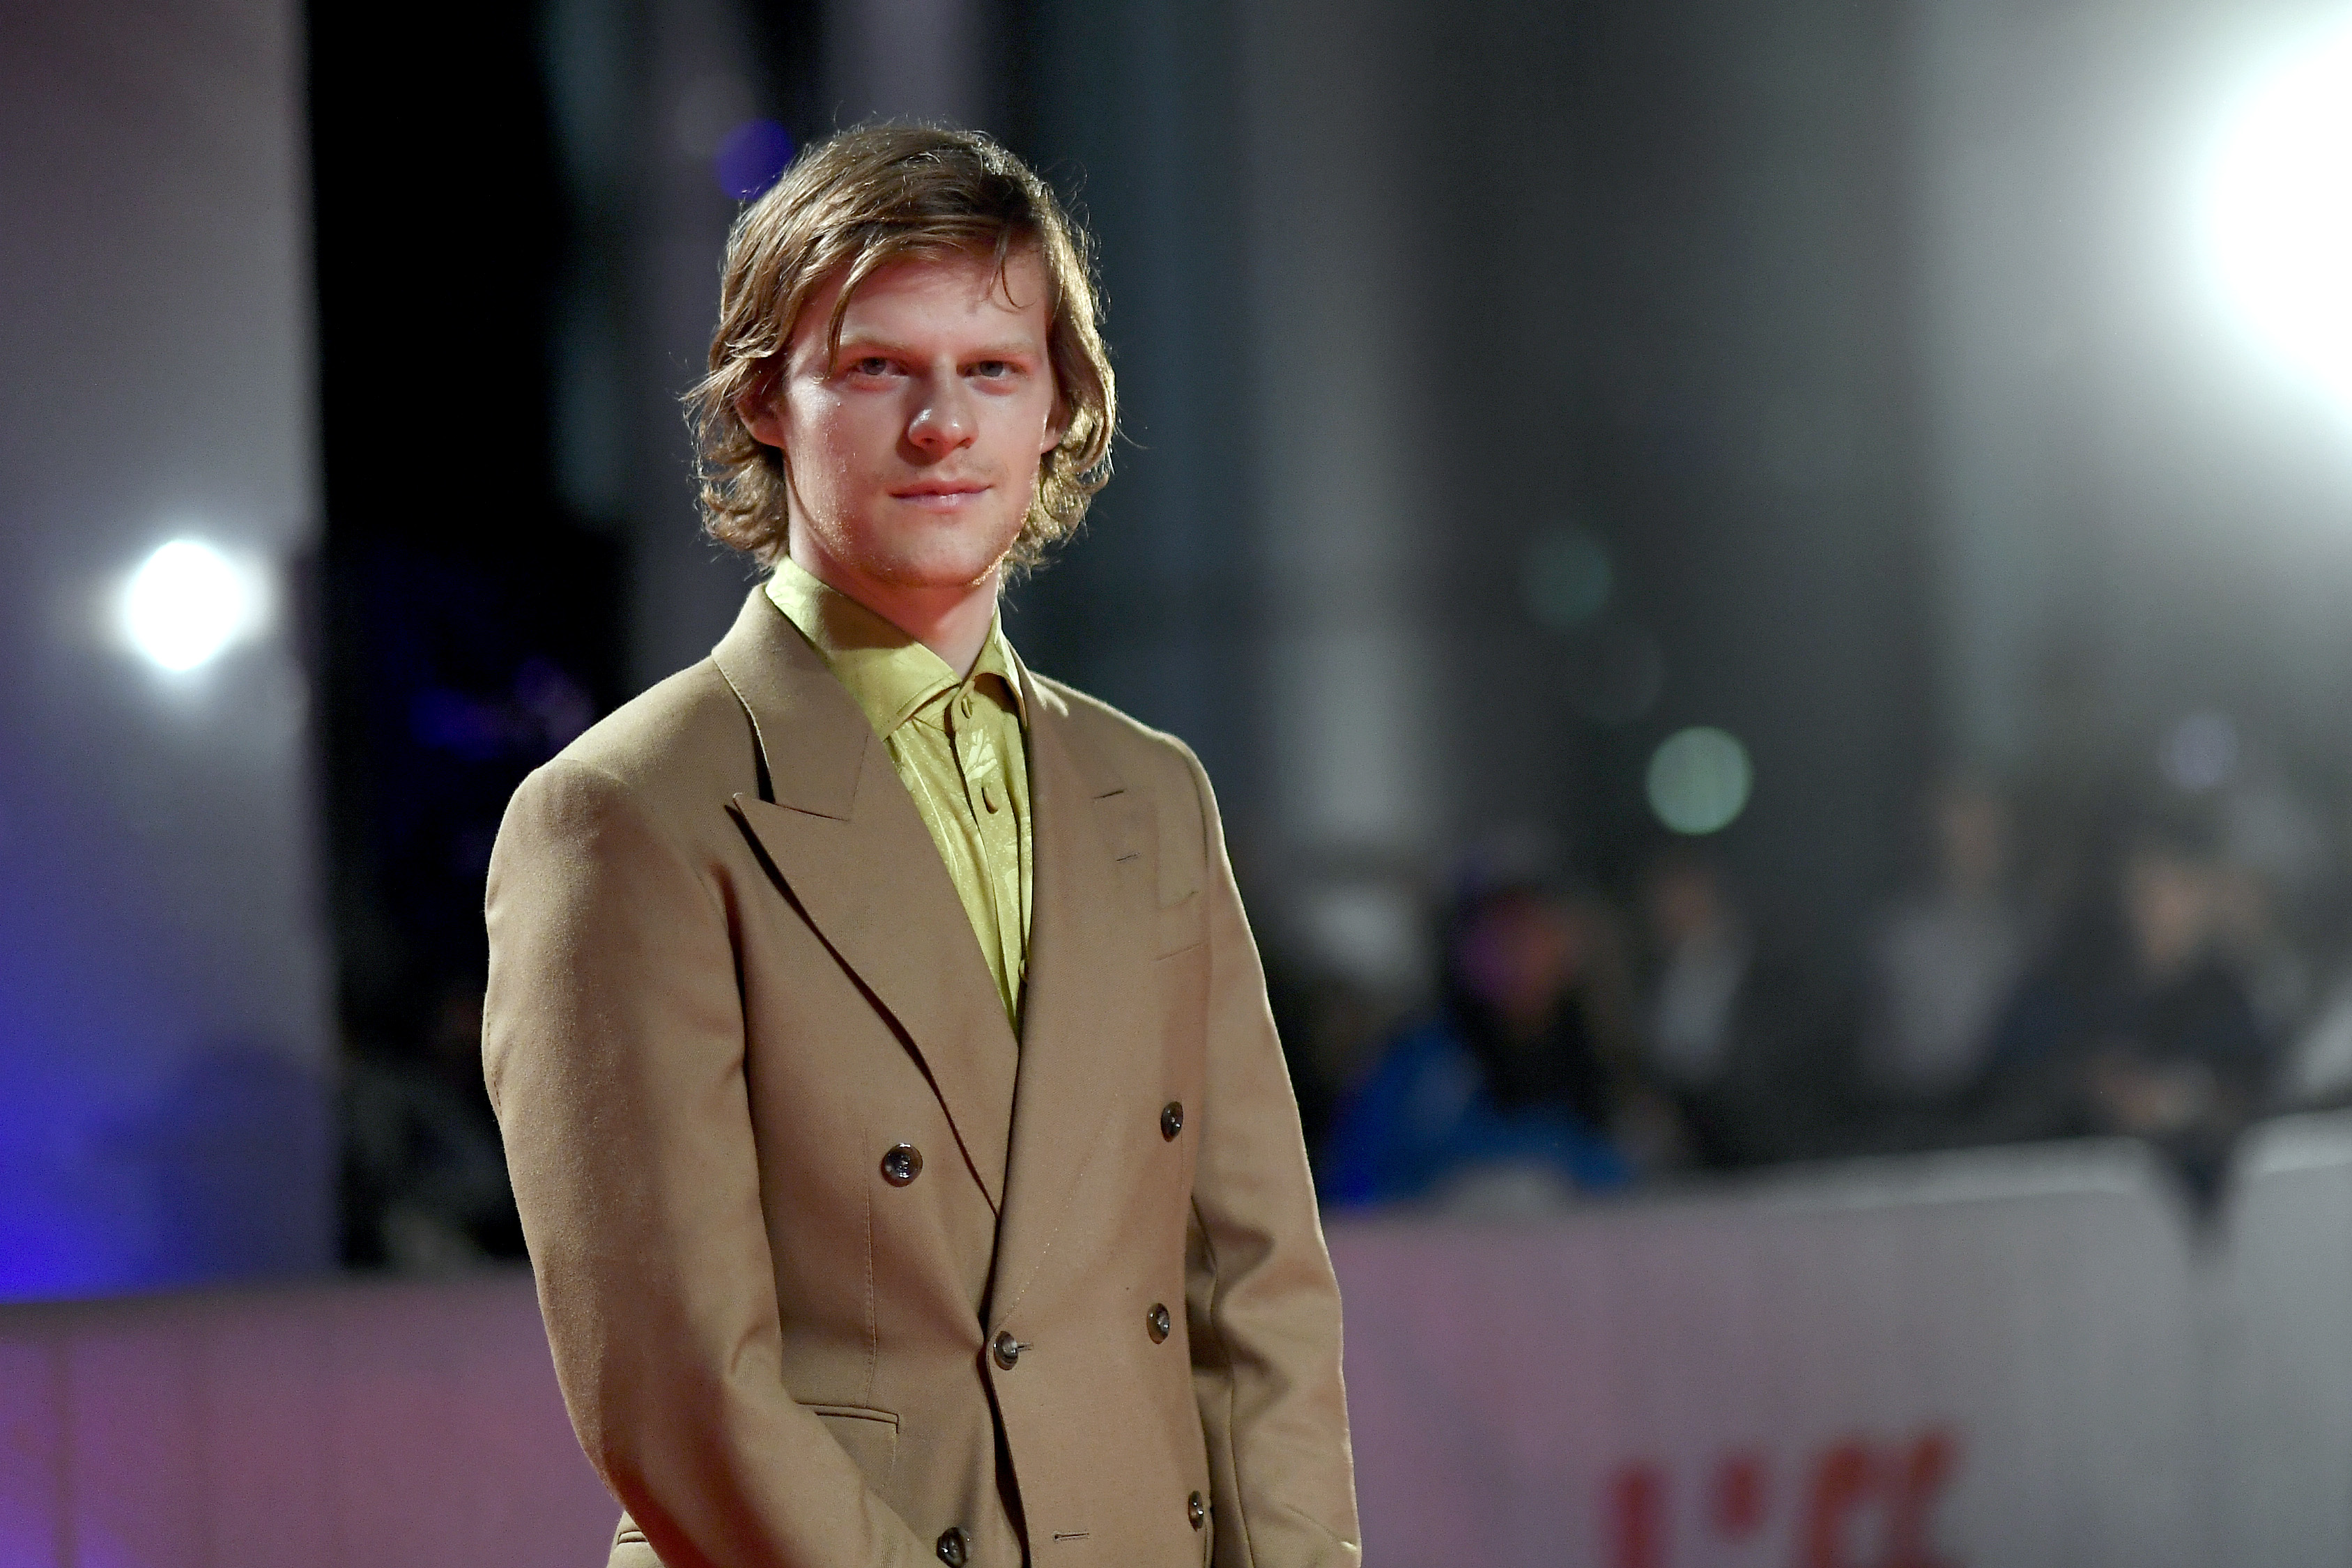 Lucas Hedges attends the "Honey Boy" premiere during the 2019 Toronto International Film Festival at Roy Thomson Hall on September 10, 2019 in Toronto, Canada | Source: Getty Images